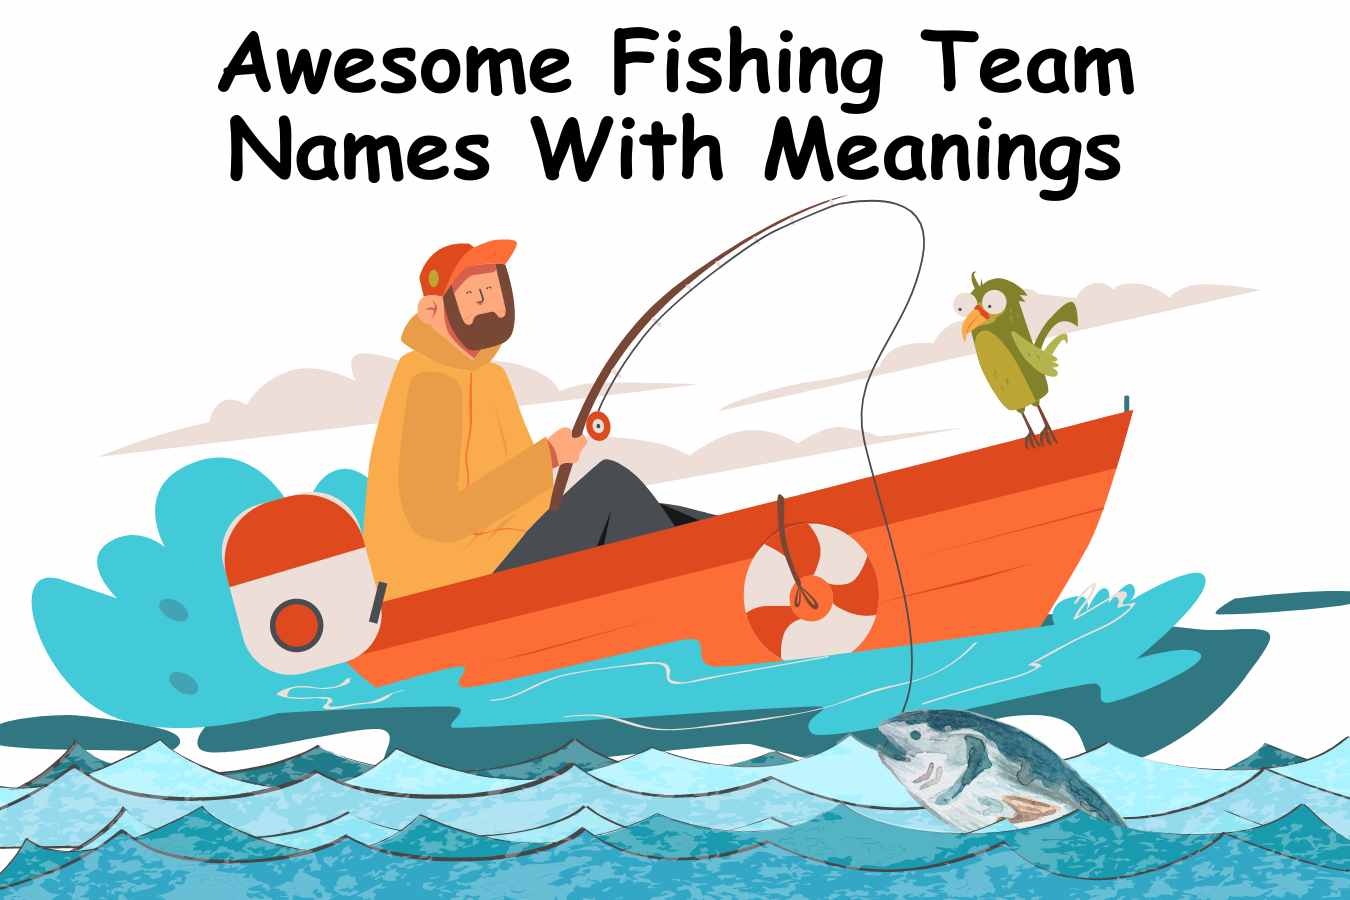 Awesome Fishing Team Names With Meanings